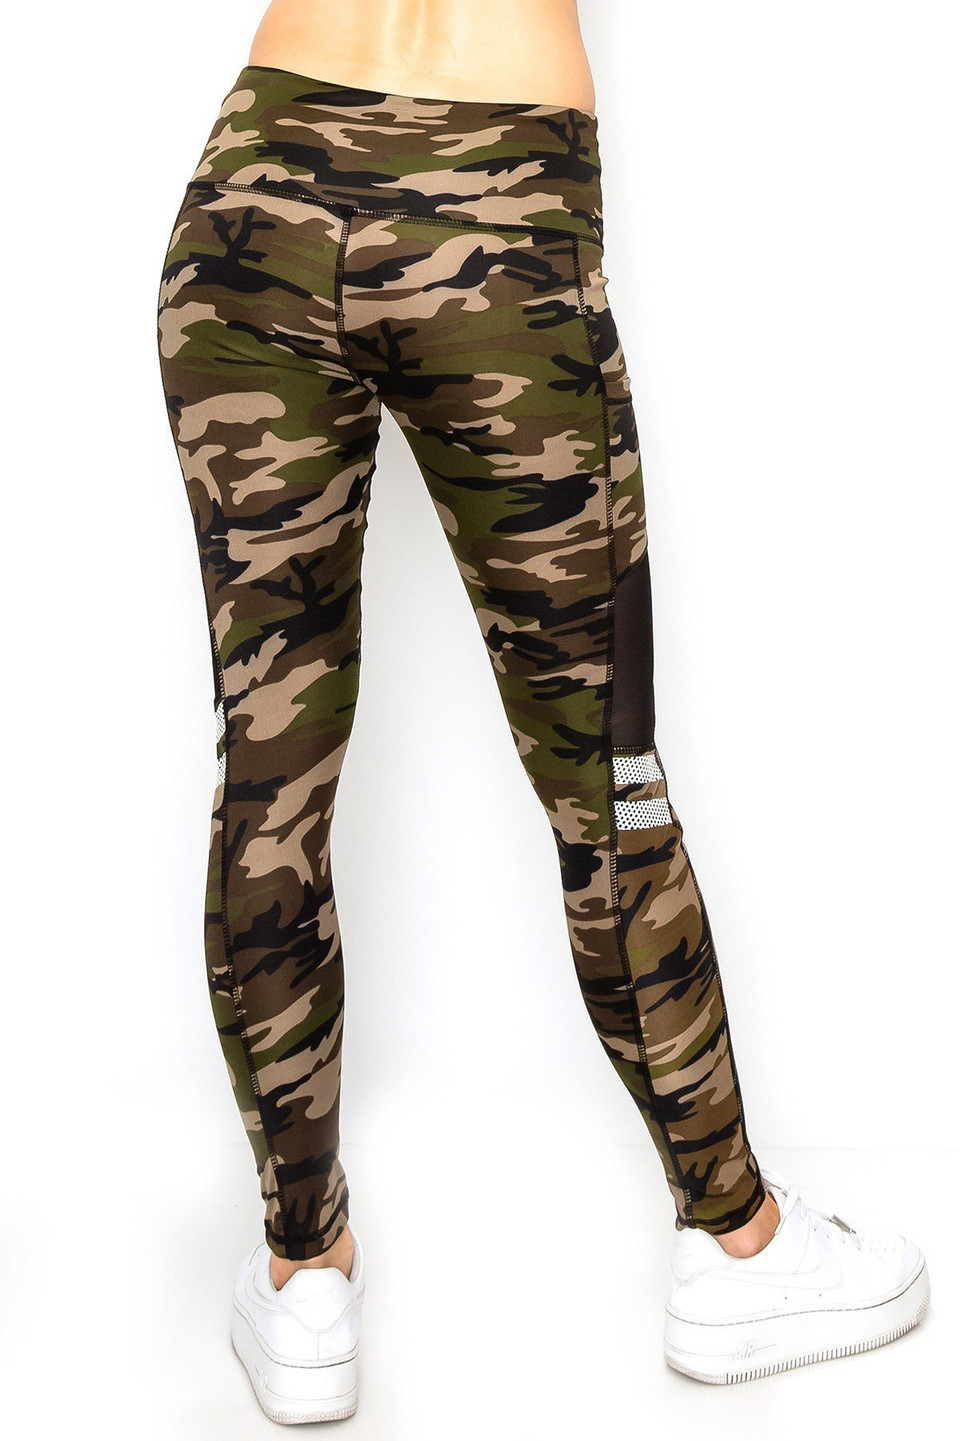 Camouflage Leggings | Only Leggings Superstore